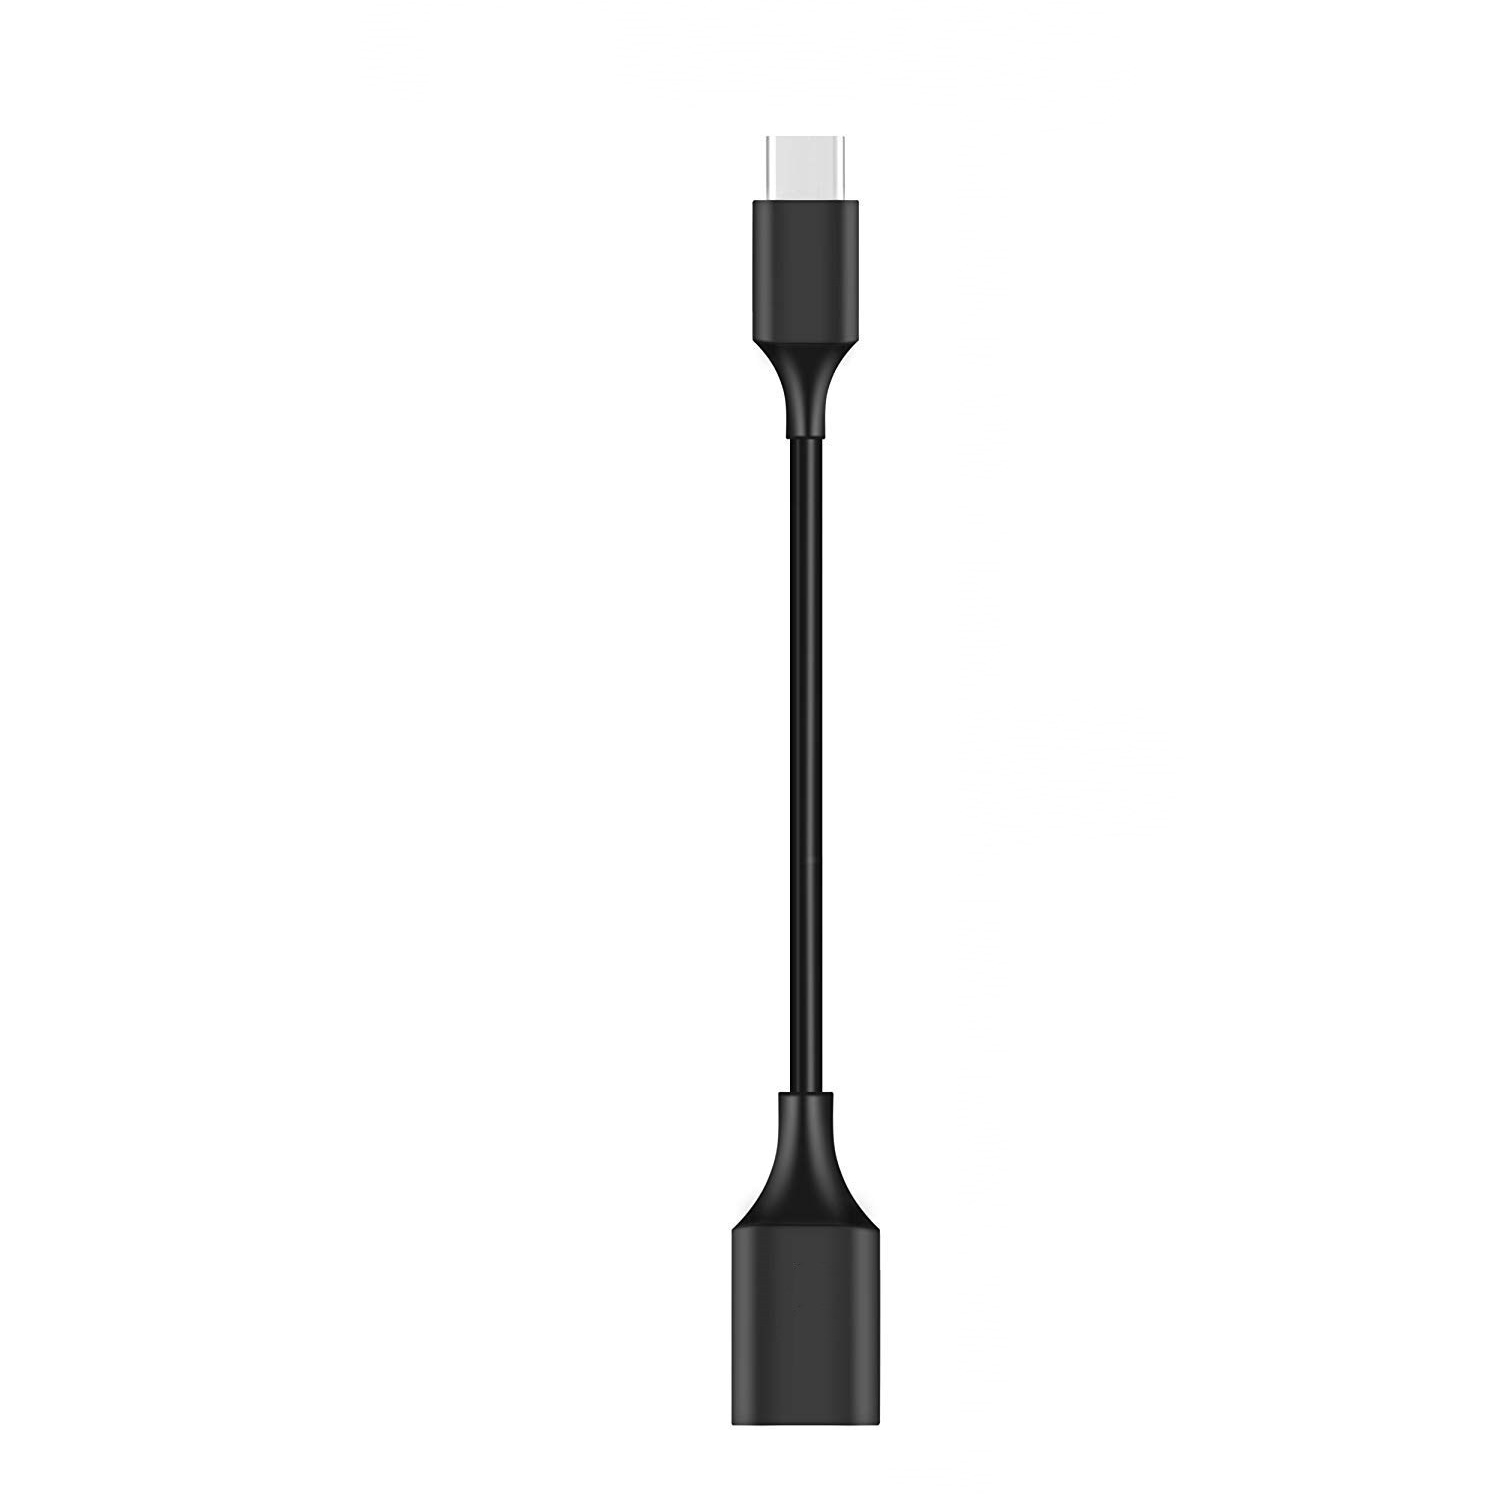 Otg Cable For Firetv Stick 10Gbps USB 3.1 C To A 3.0 